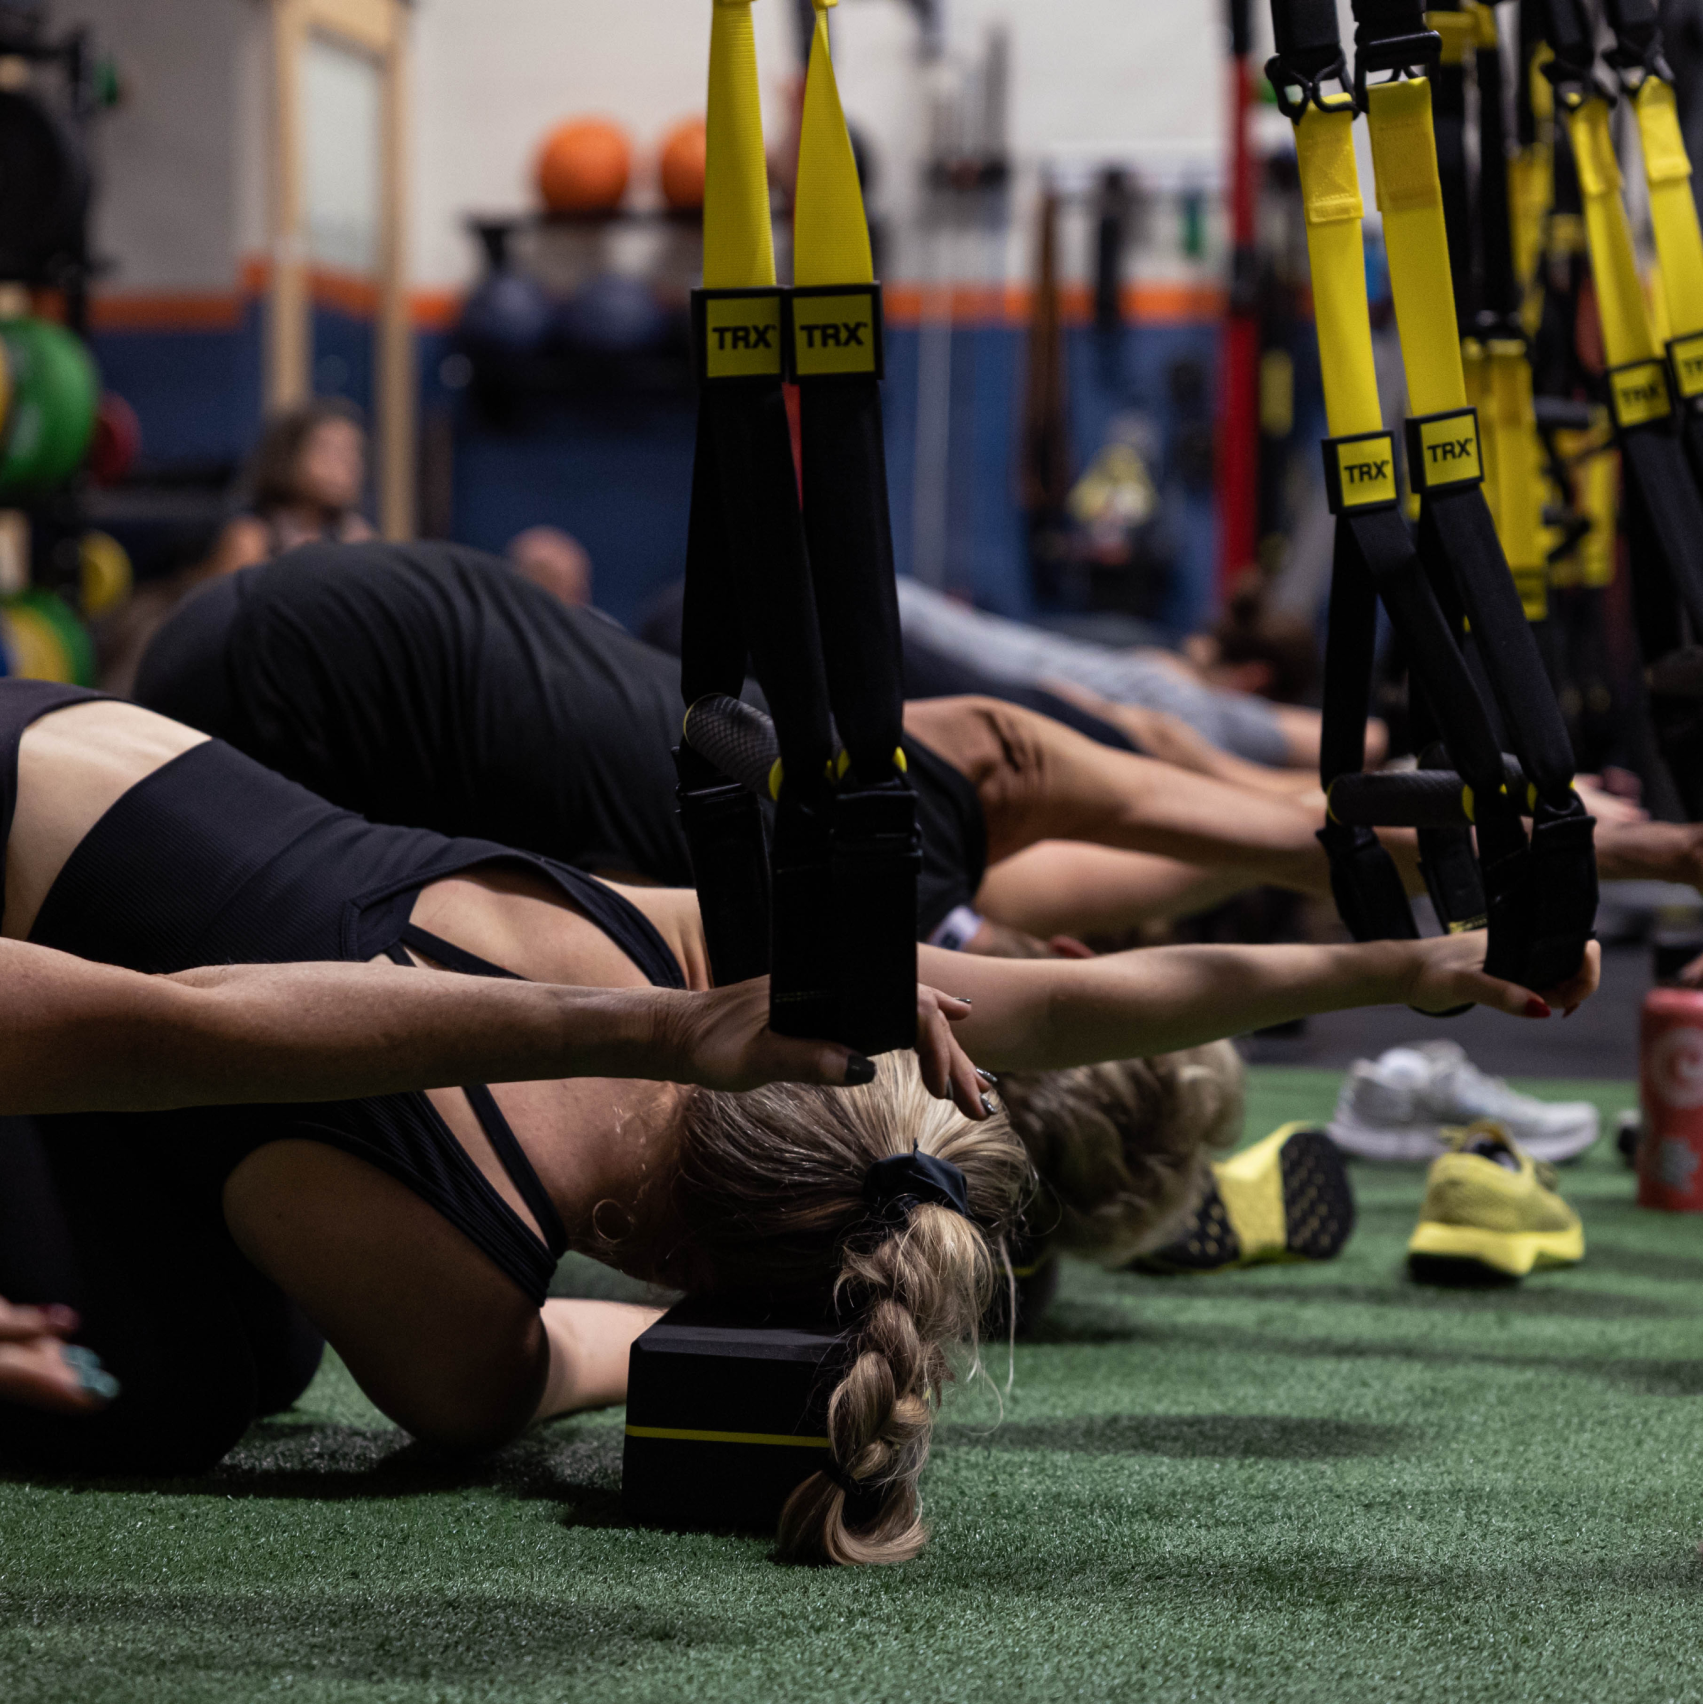 TRX YOGA FOUNDATIONS COURSE:  LIVE IN PERSON